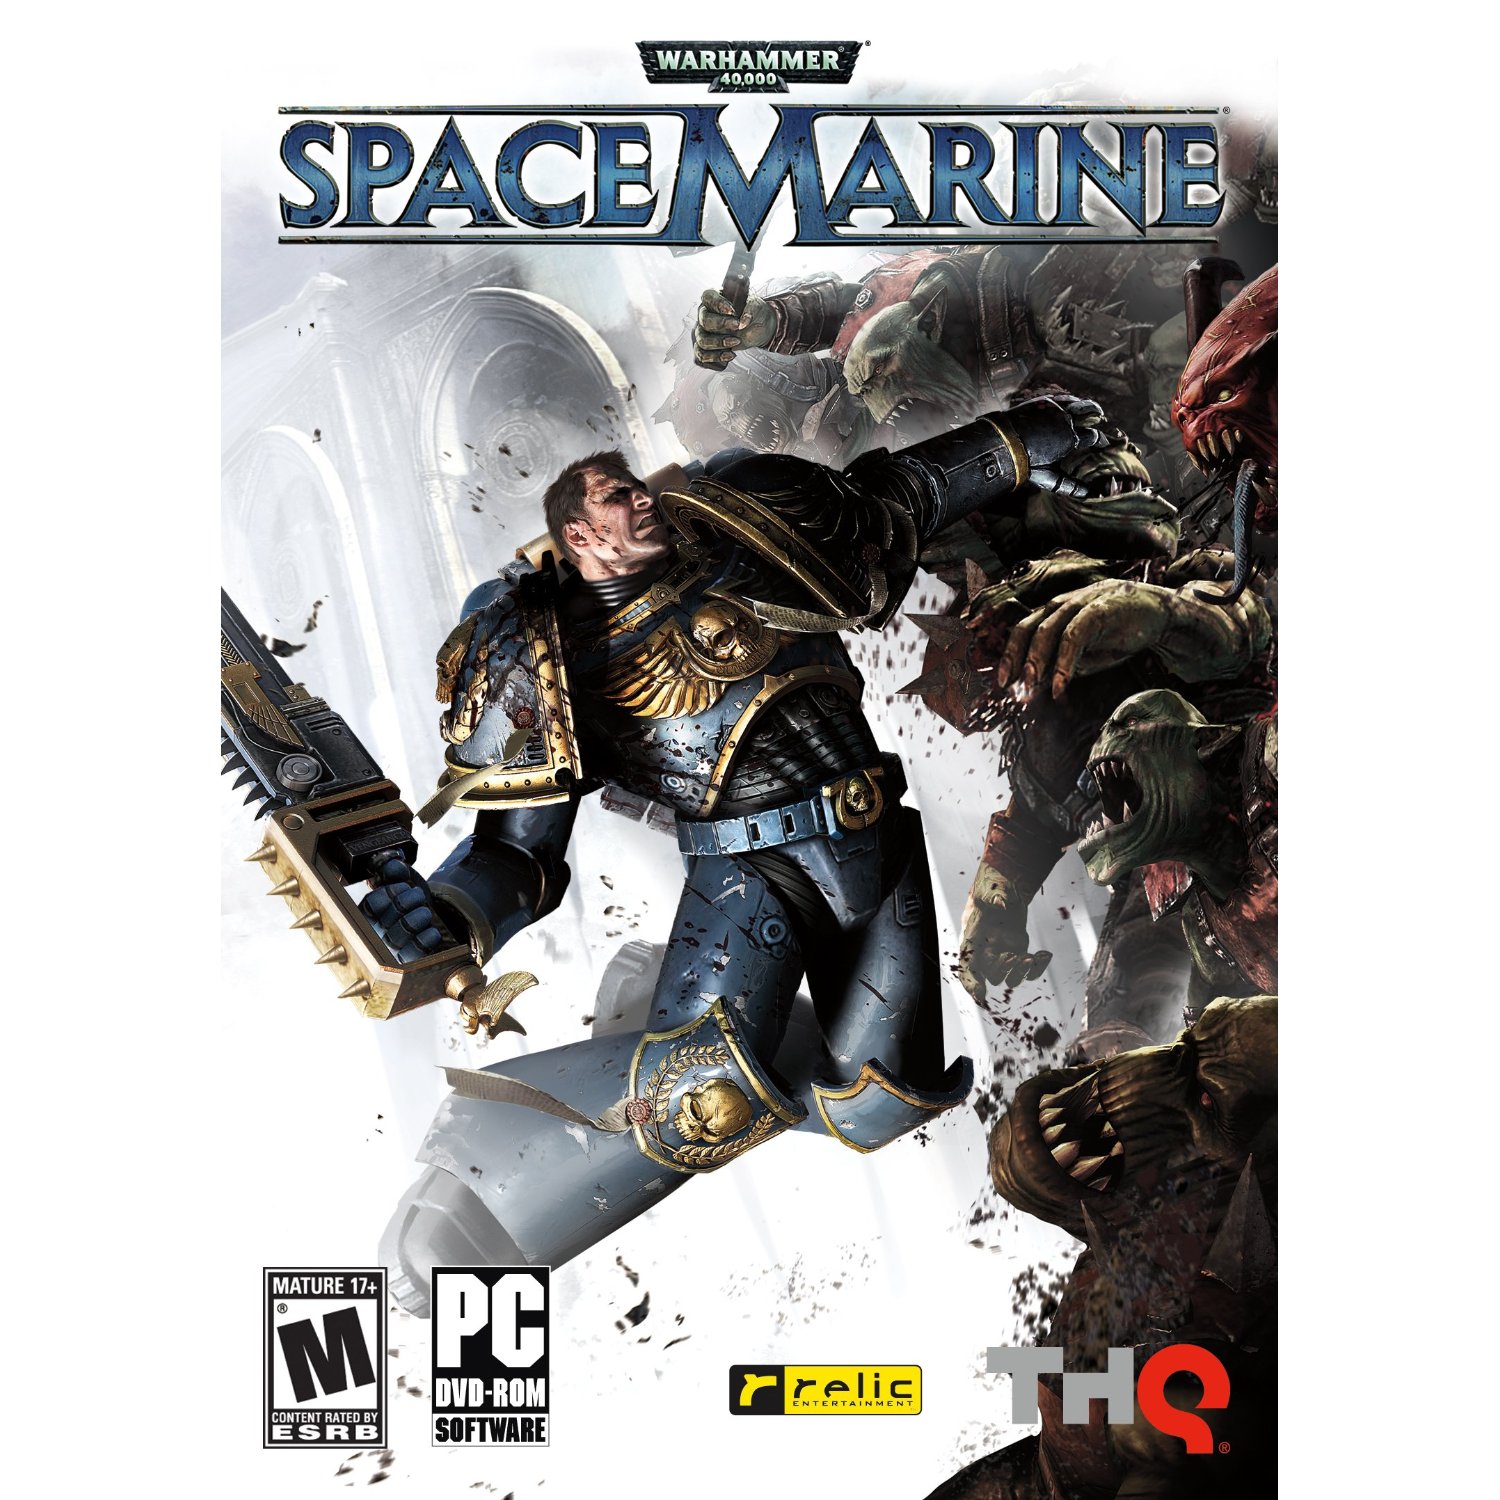 http://thetechjournal.com/wp-content/uploads/images/1110/1317482788-warhammer-40k-space-marine--pc-game-review-1.jpg